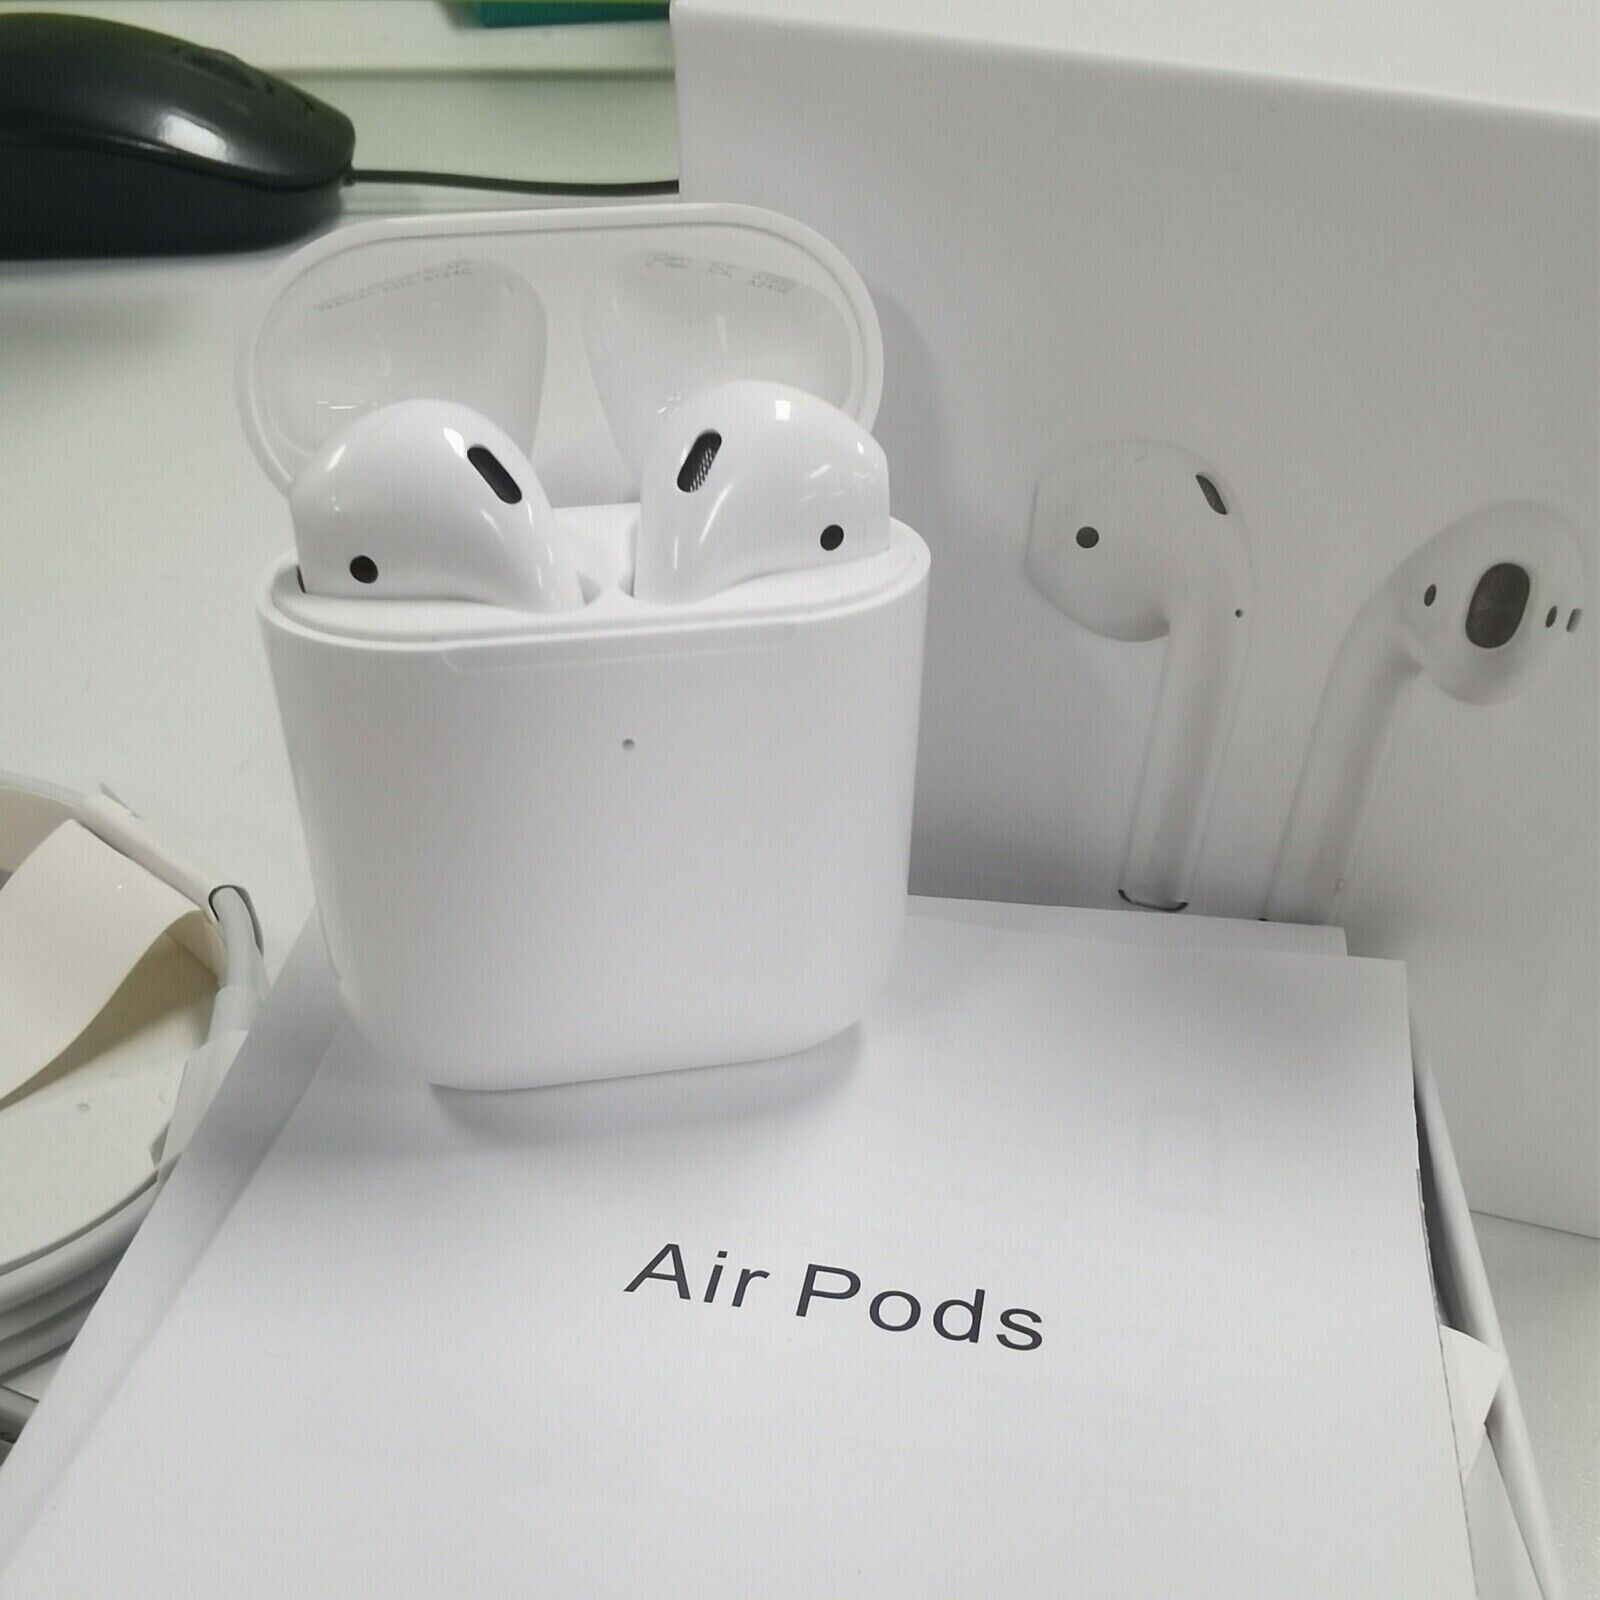 Apple AirPods 2nd Generation with Charging Case White-Original Brand